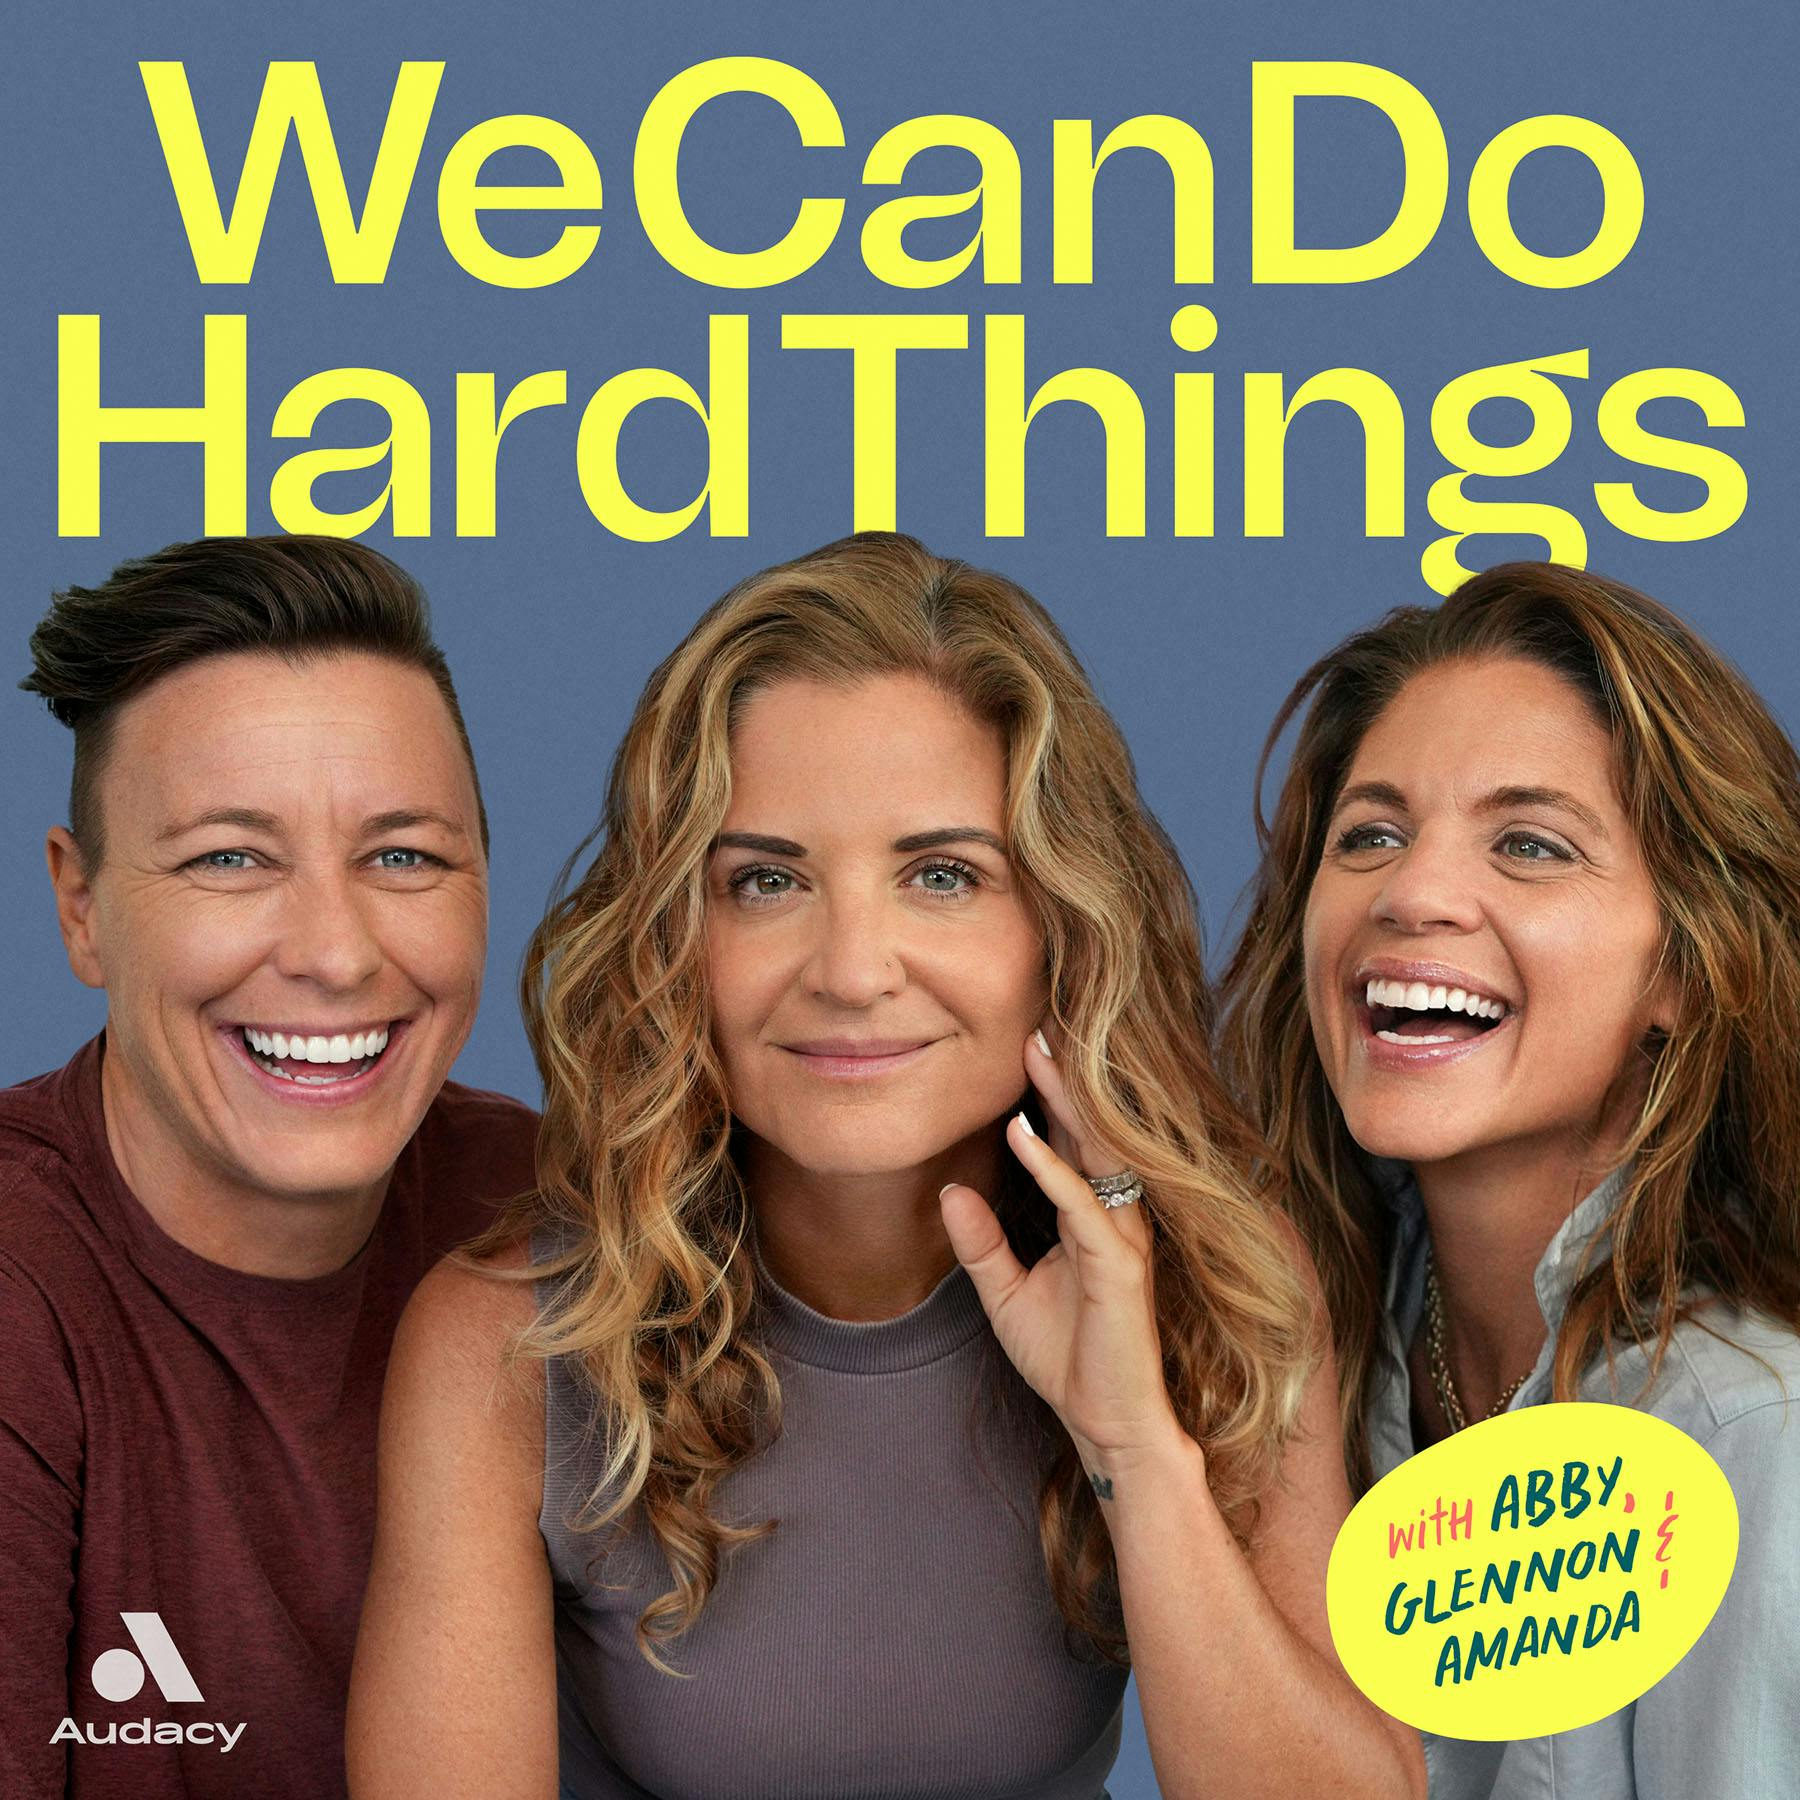 108. ABORTION: Family Meeting on Four Things to Do Next by Glennon Doyle and Audacy